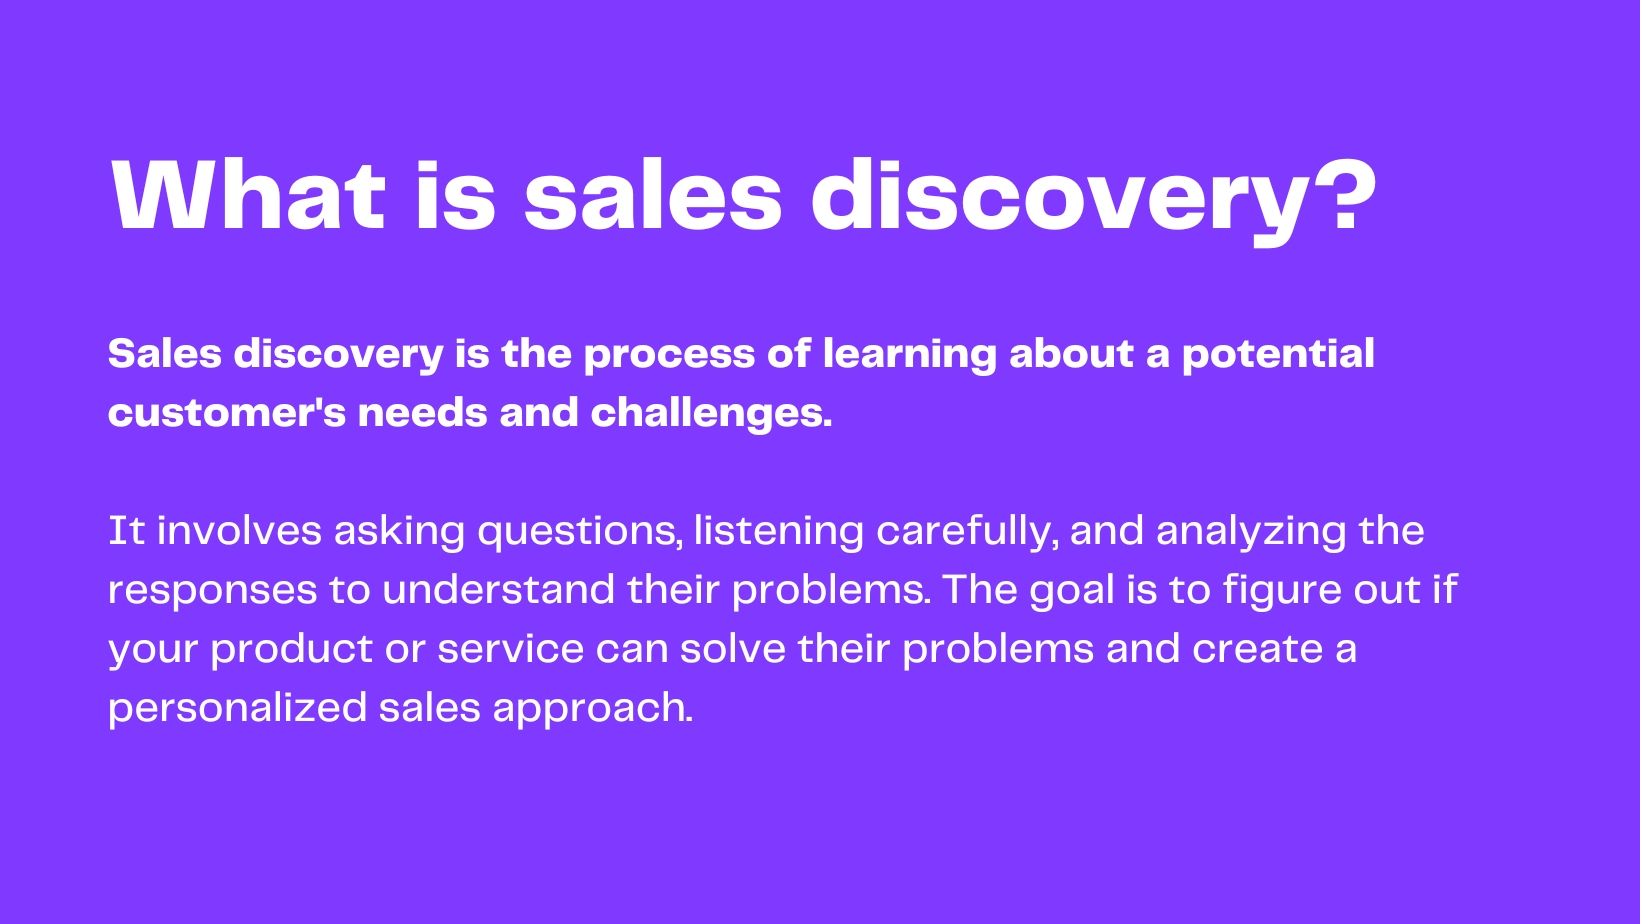 Definition of sales discovery - what is sales discovery